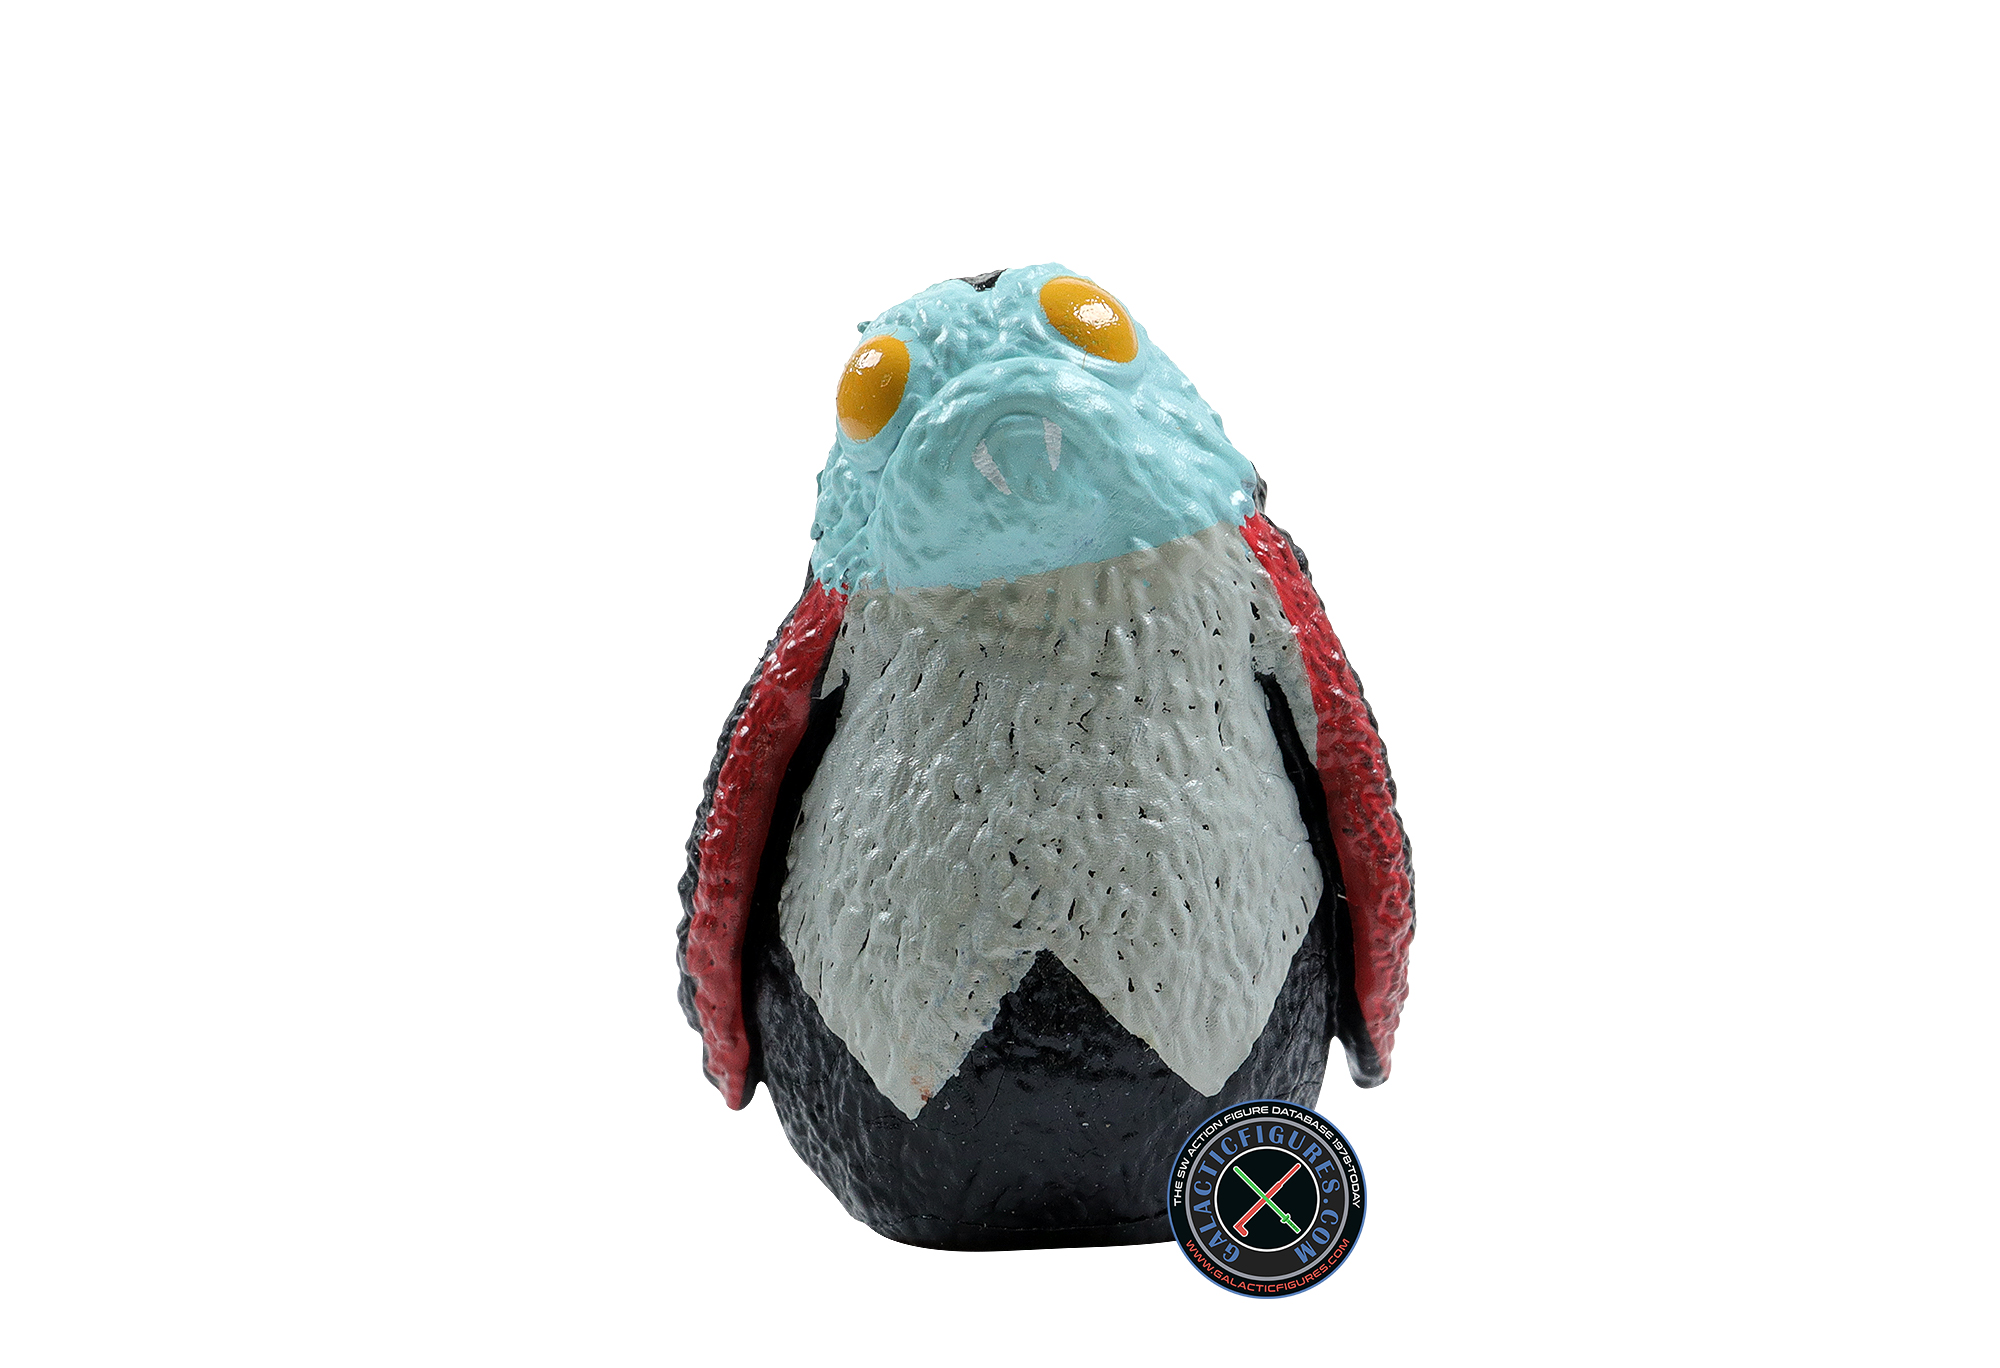 Porg 2022 Halloween Edition 2-Pack #2 of 2